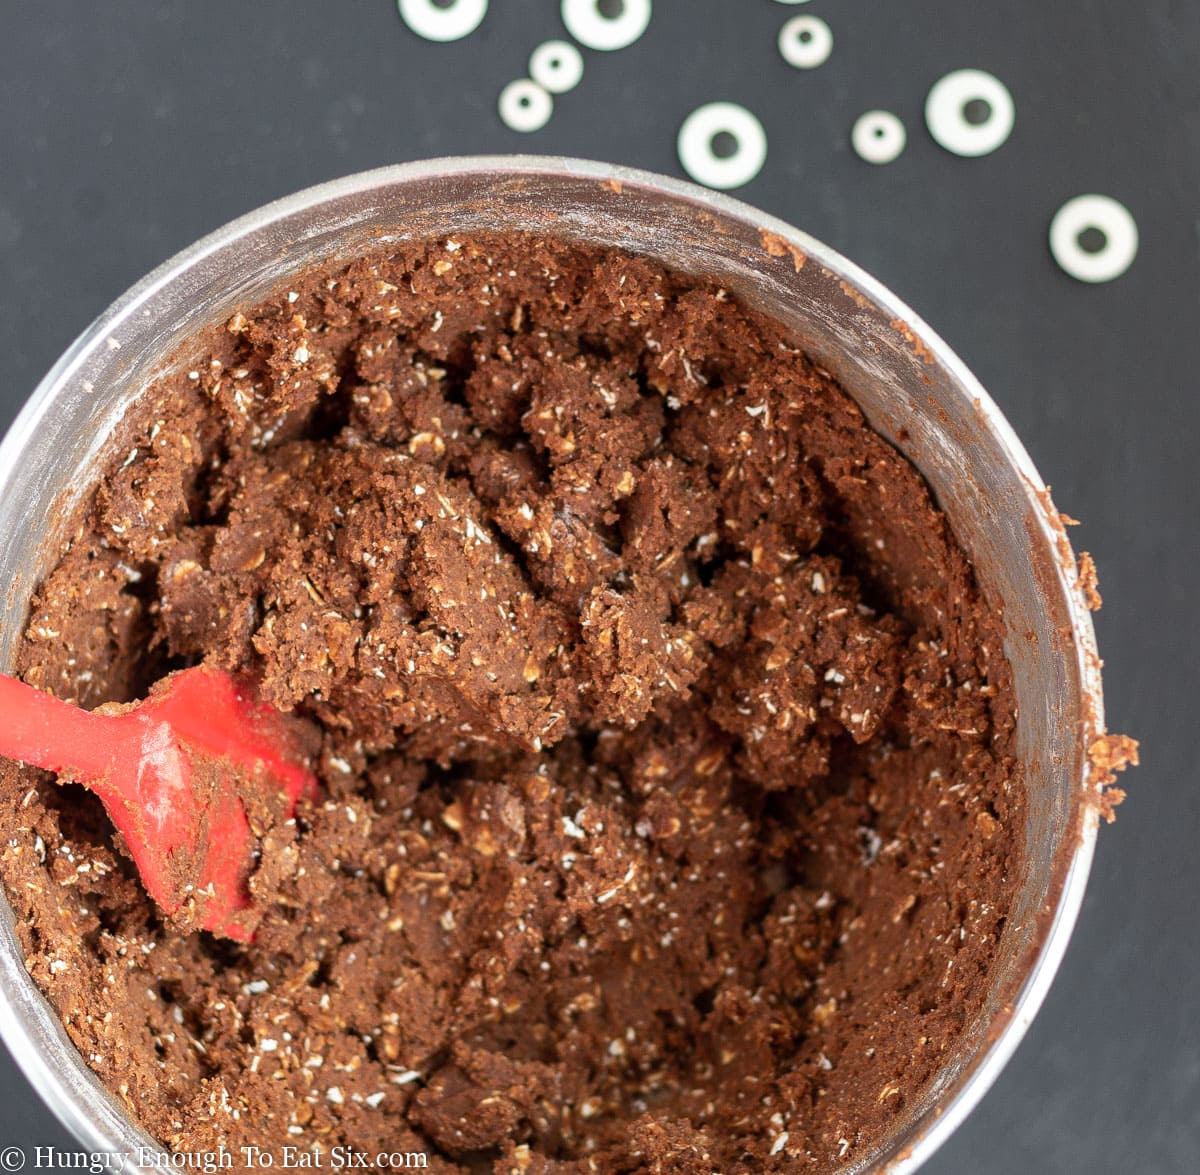 Chocolate oat cookie dough in a metal mixing bowl with a red spatula